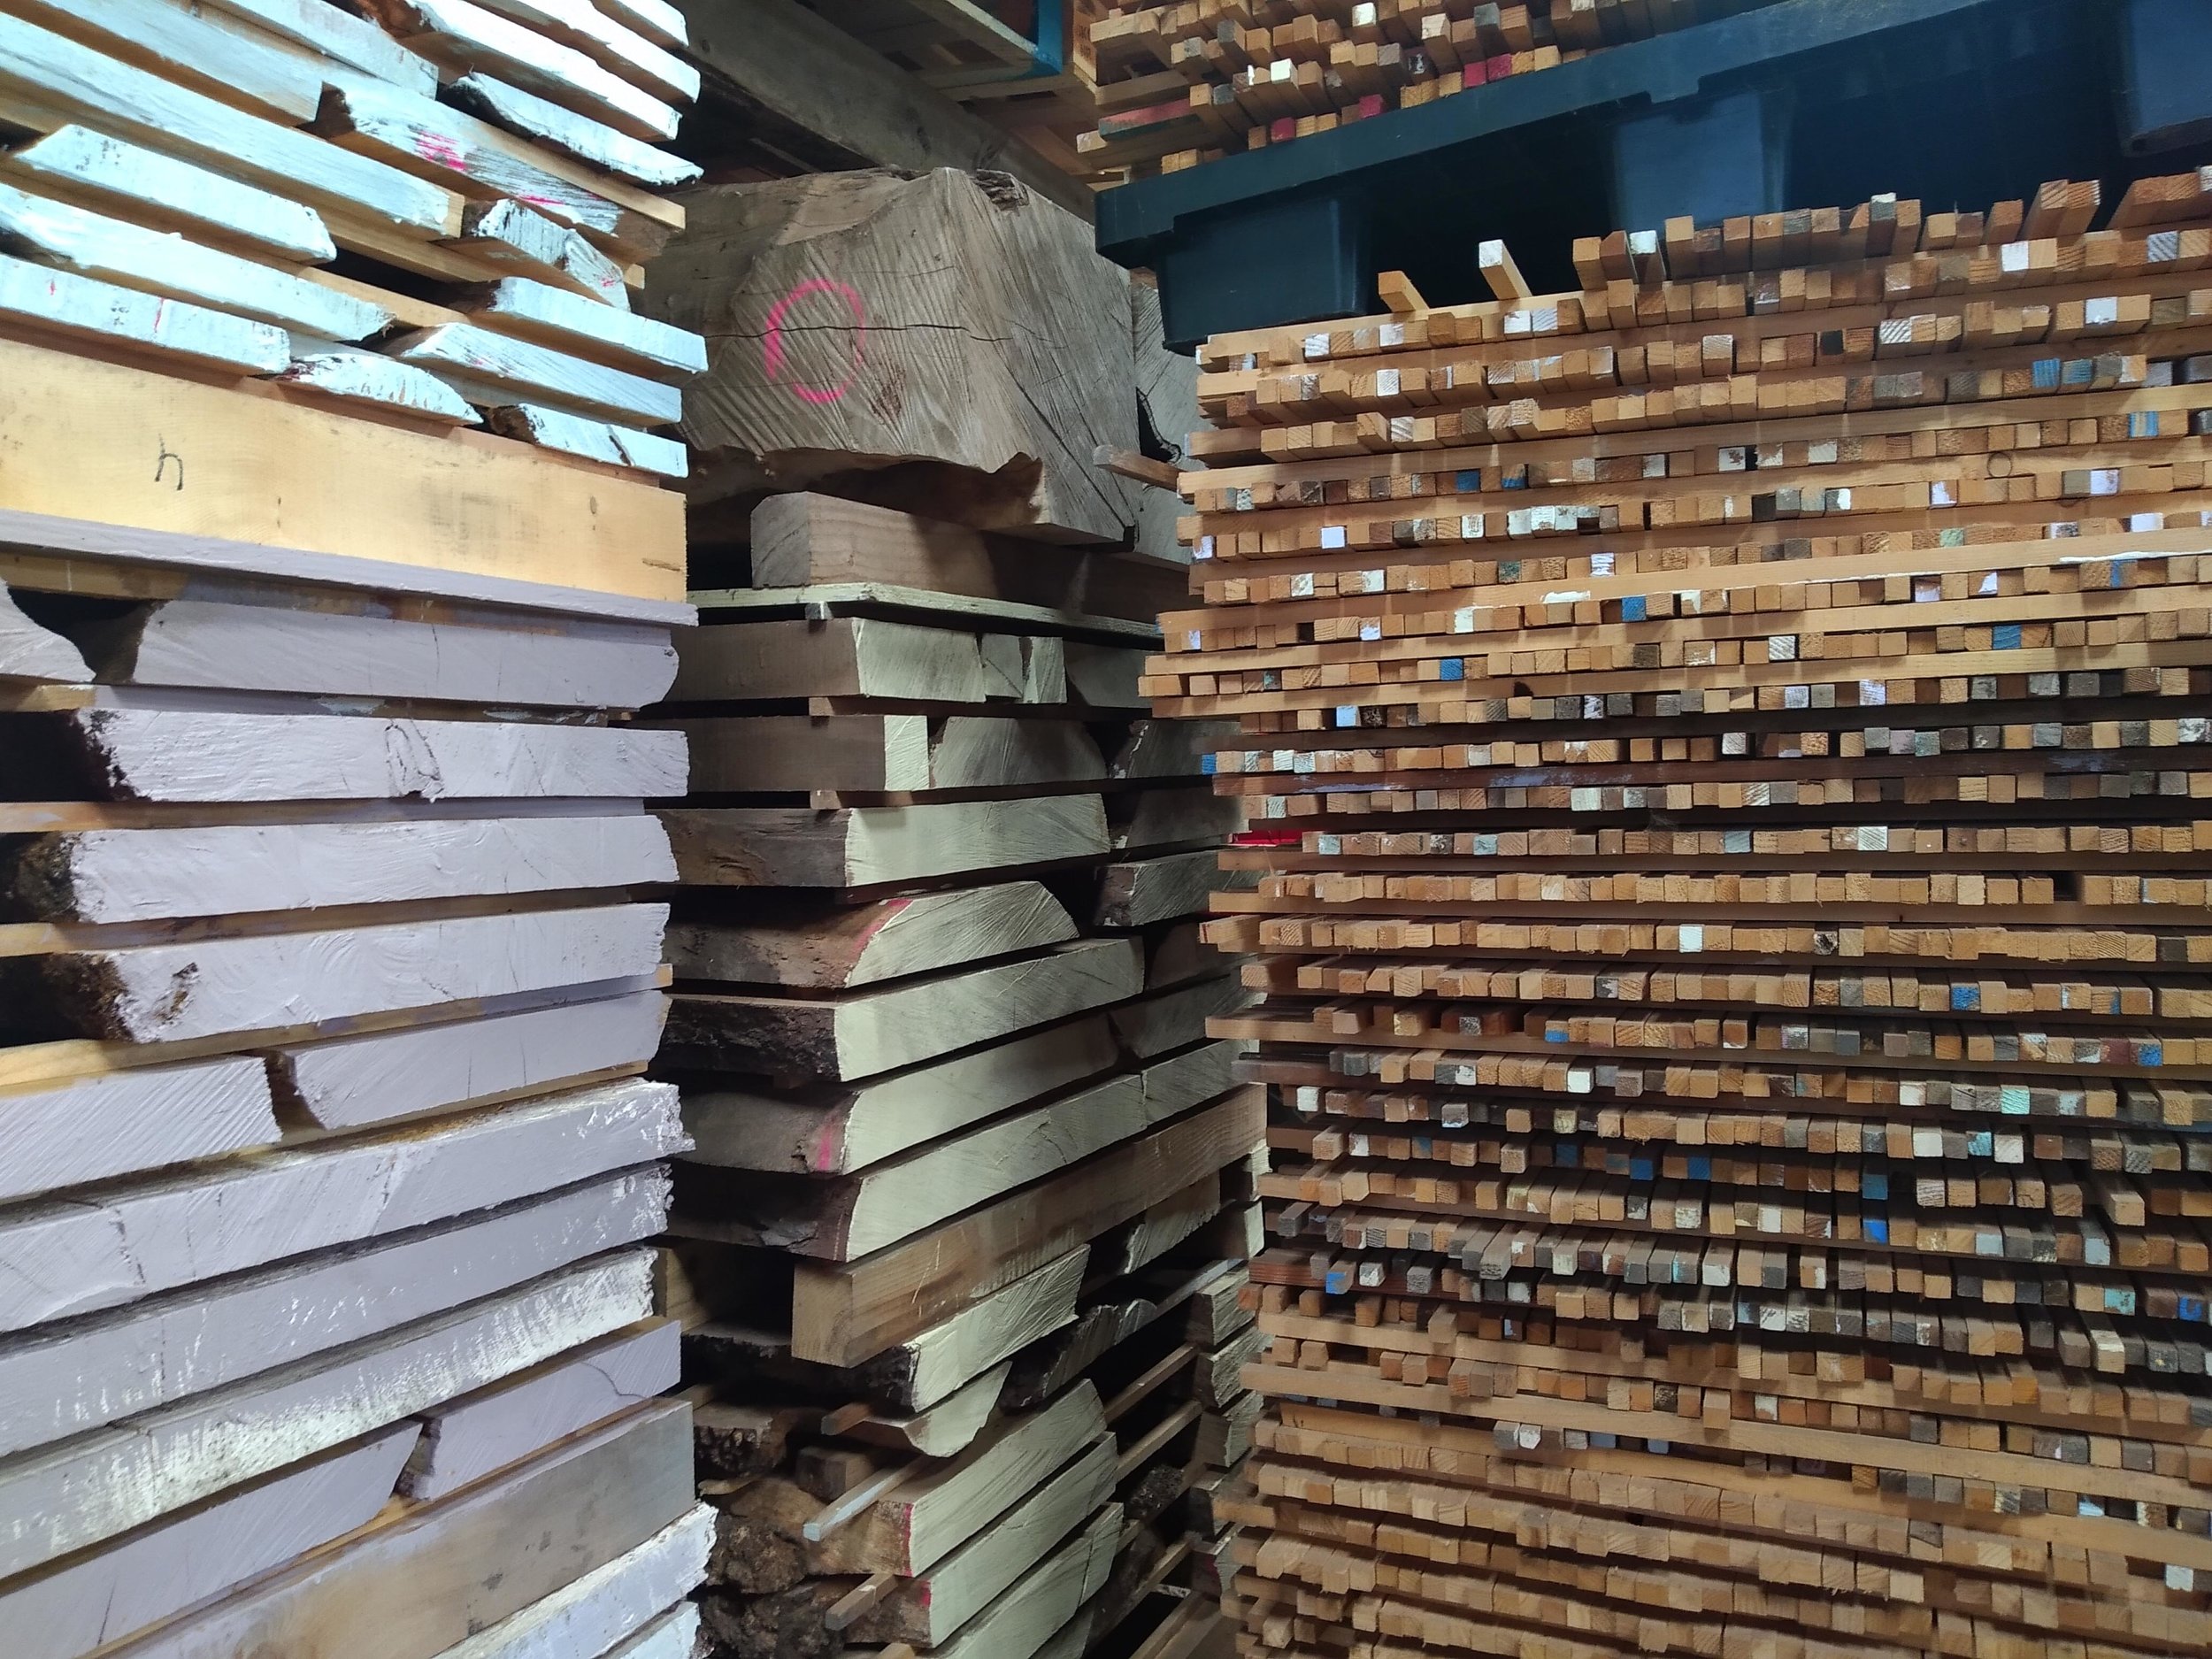 Stack of Scottish timber used in custom hand crafted bespoke commission furniture by Namon Gaston